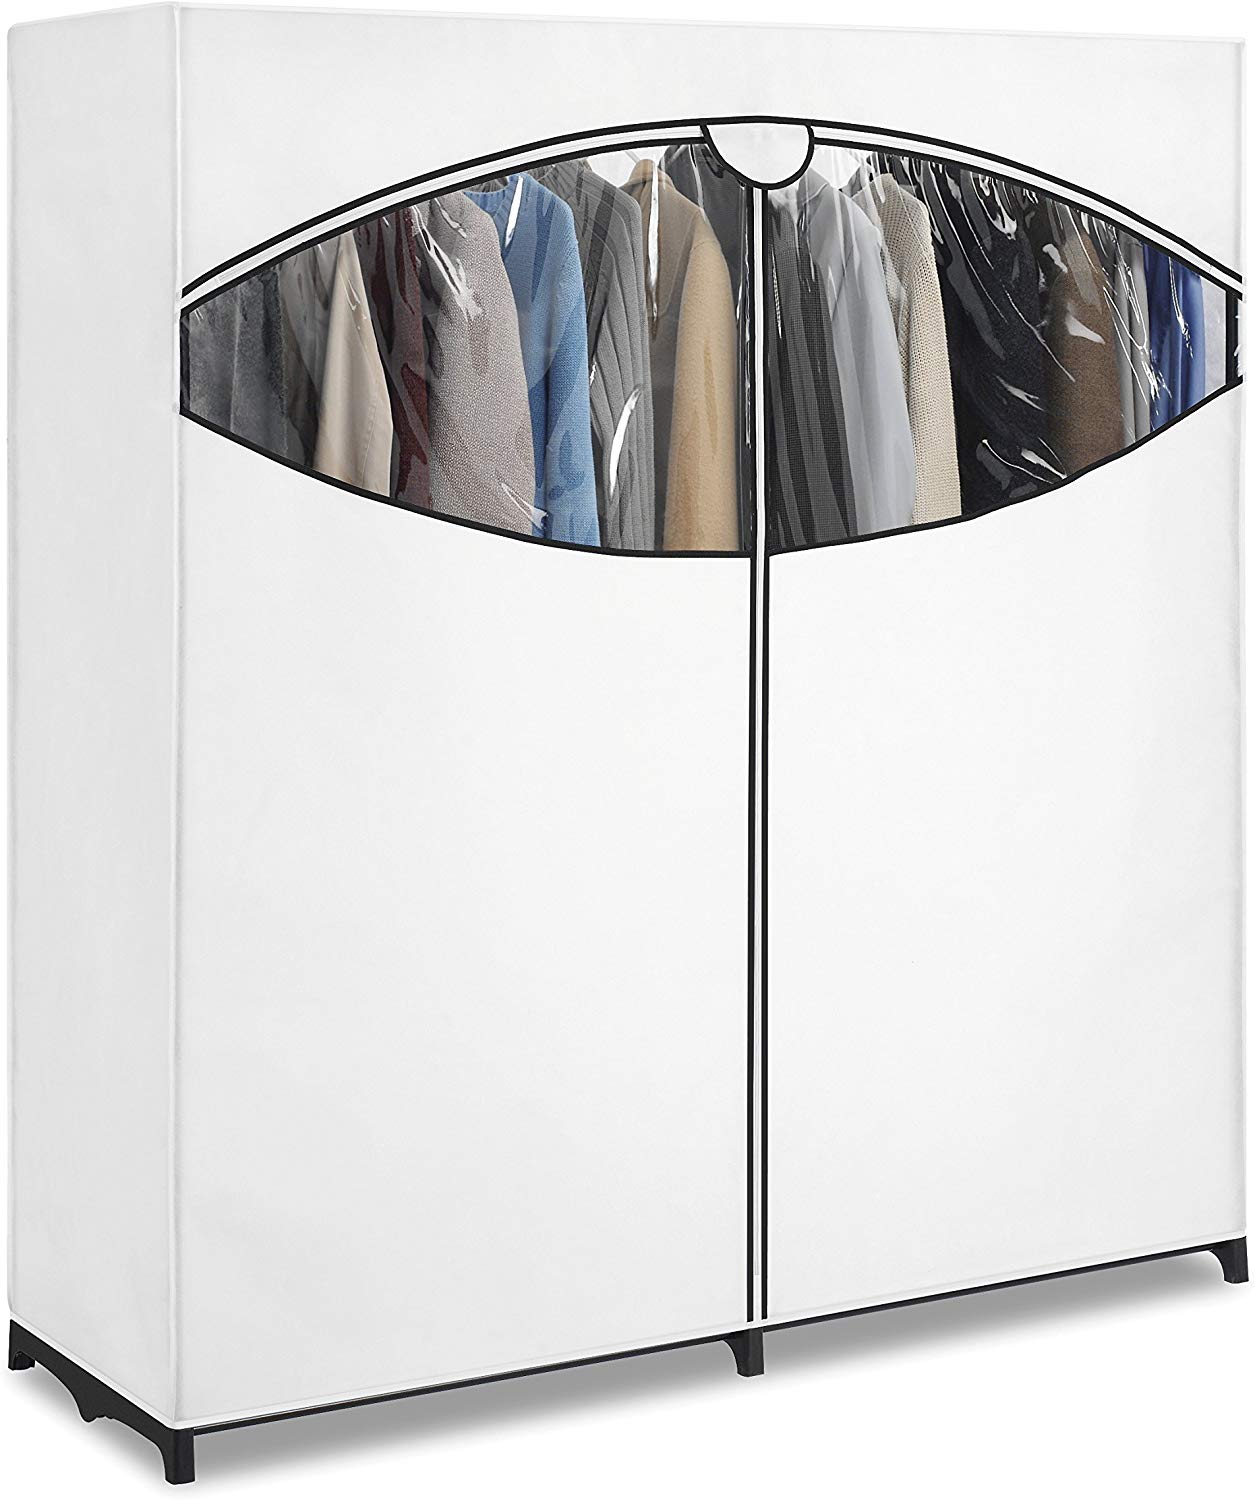 Whitmor Extra-Wide 60-inch Polypropylene Clothes Closet with White Cover - image 4 of 5